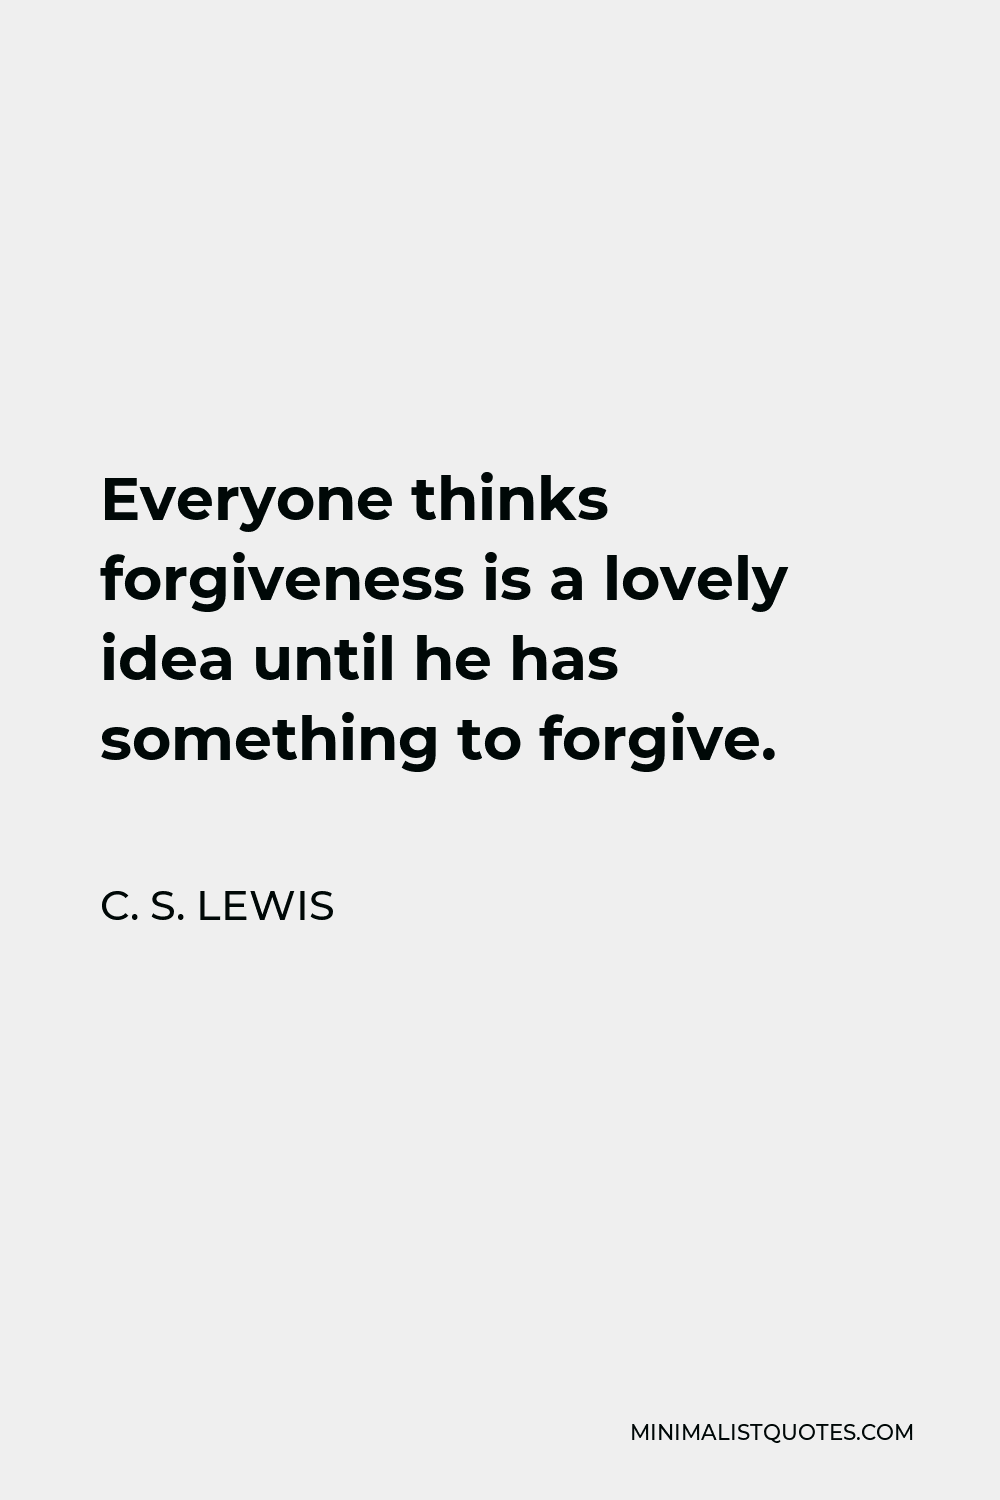 C. S. Lewis Quote - Everyone thinks forgiveness is a lovely idea until he has something to forgive.